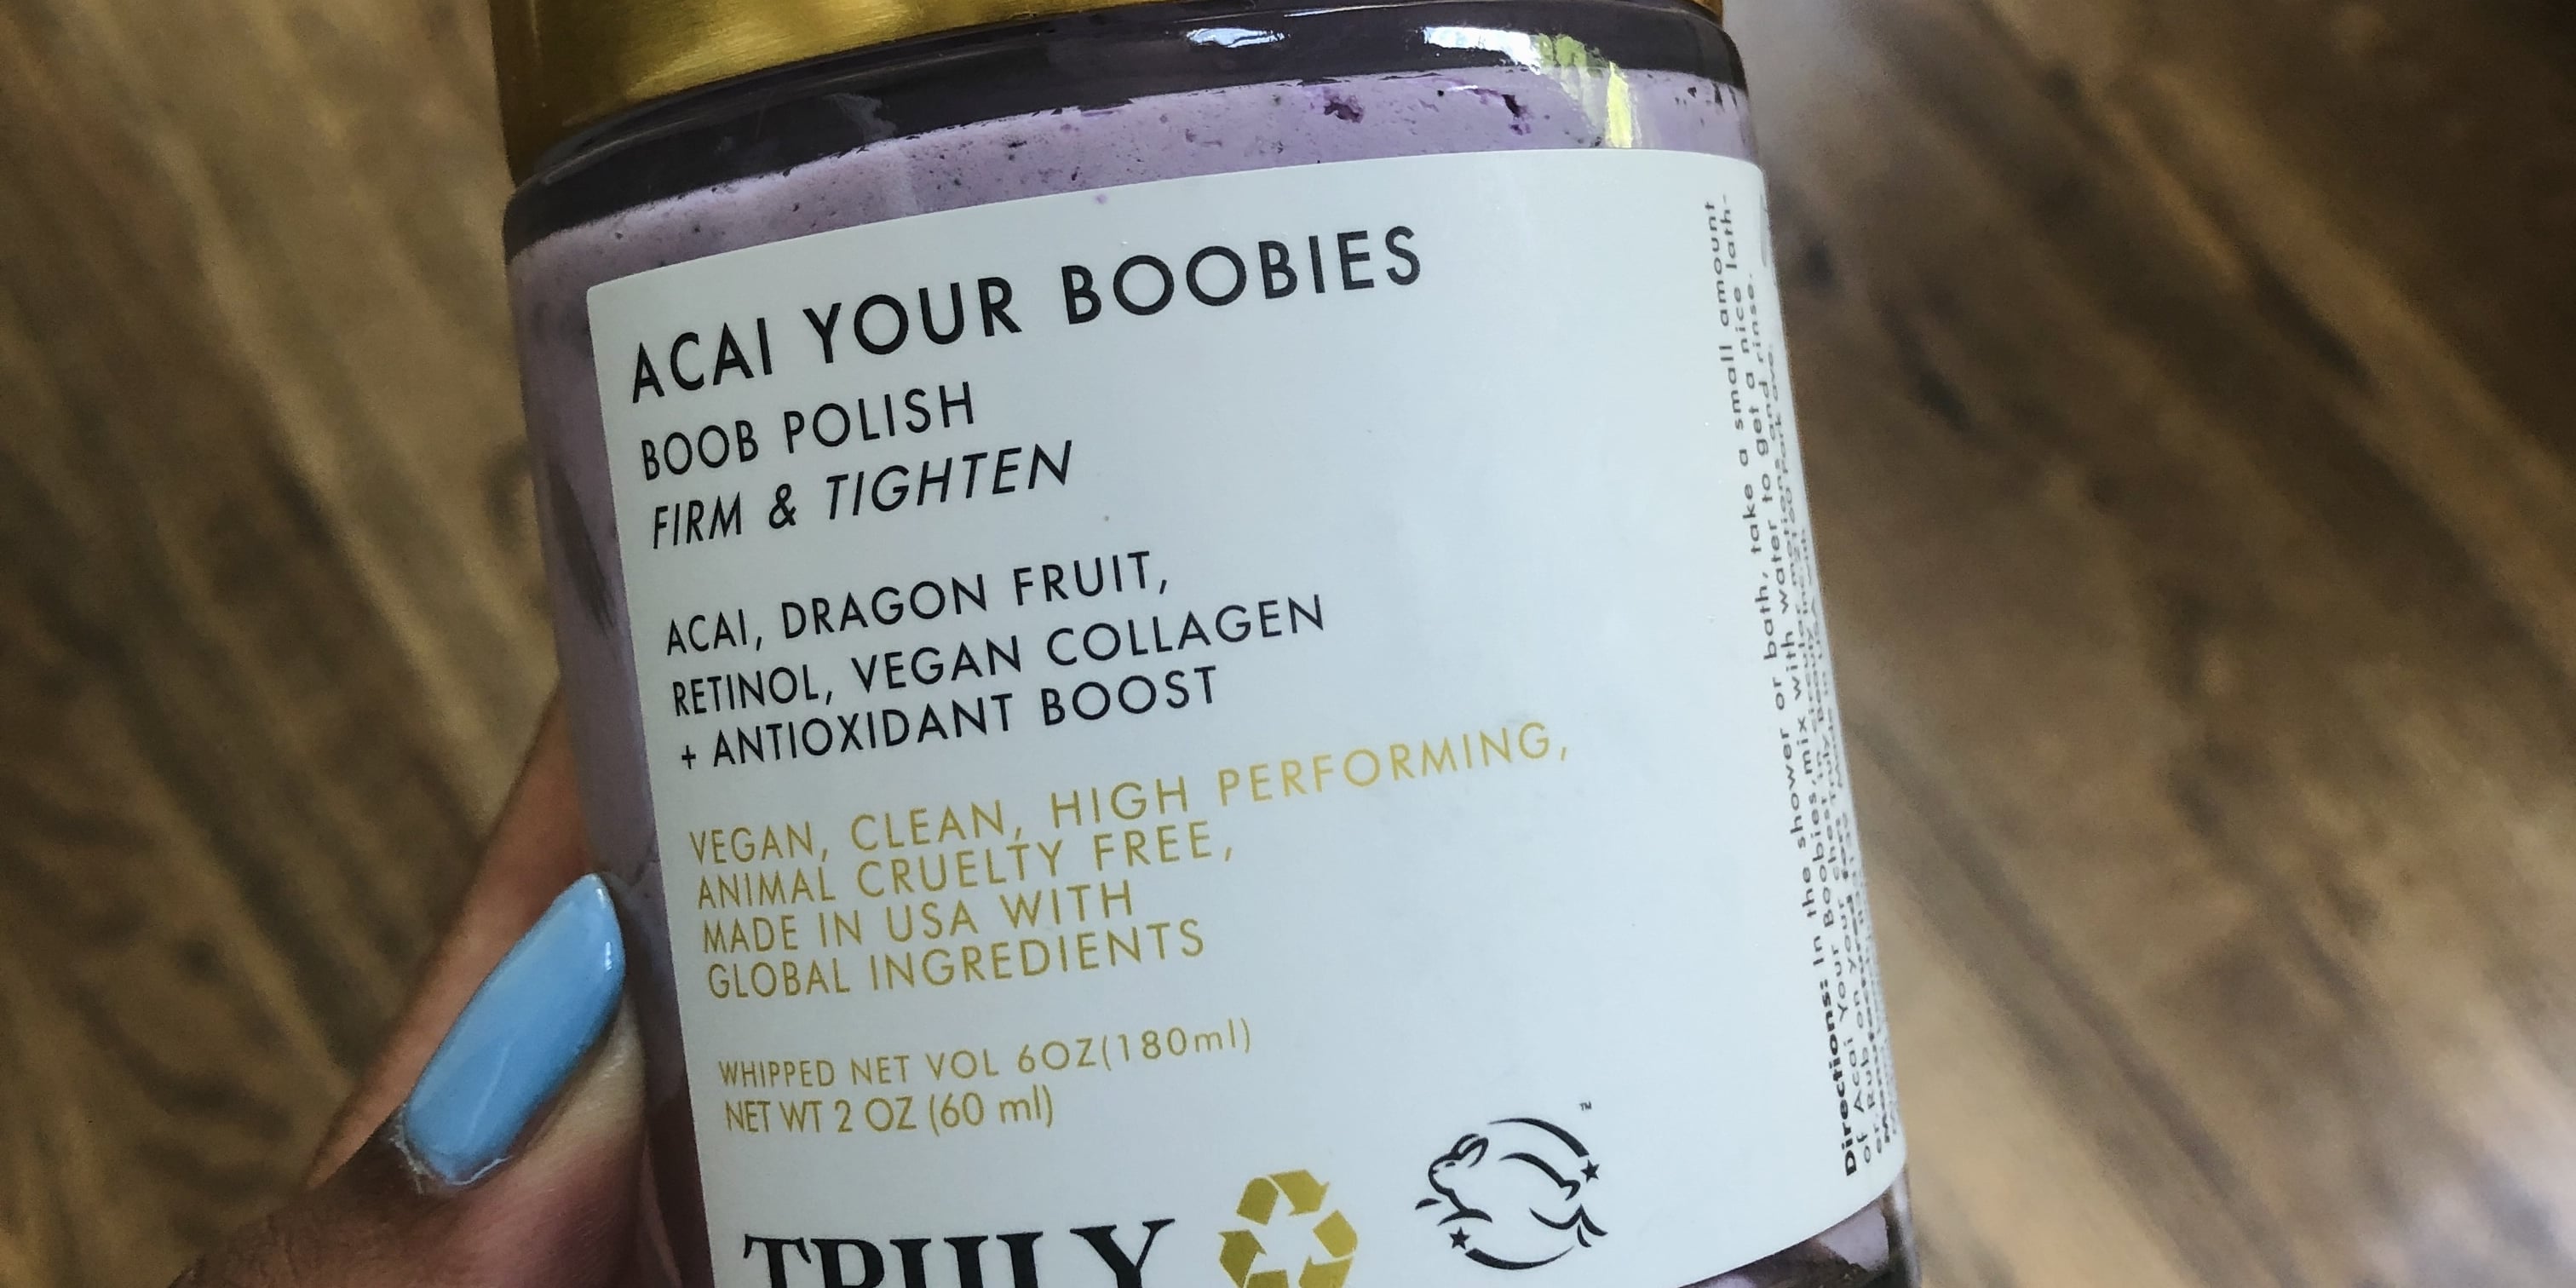 dody sameh recommends Truly Acai Your Boobies